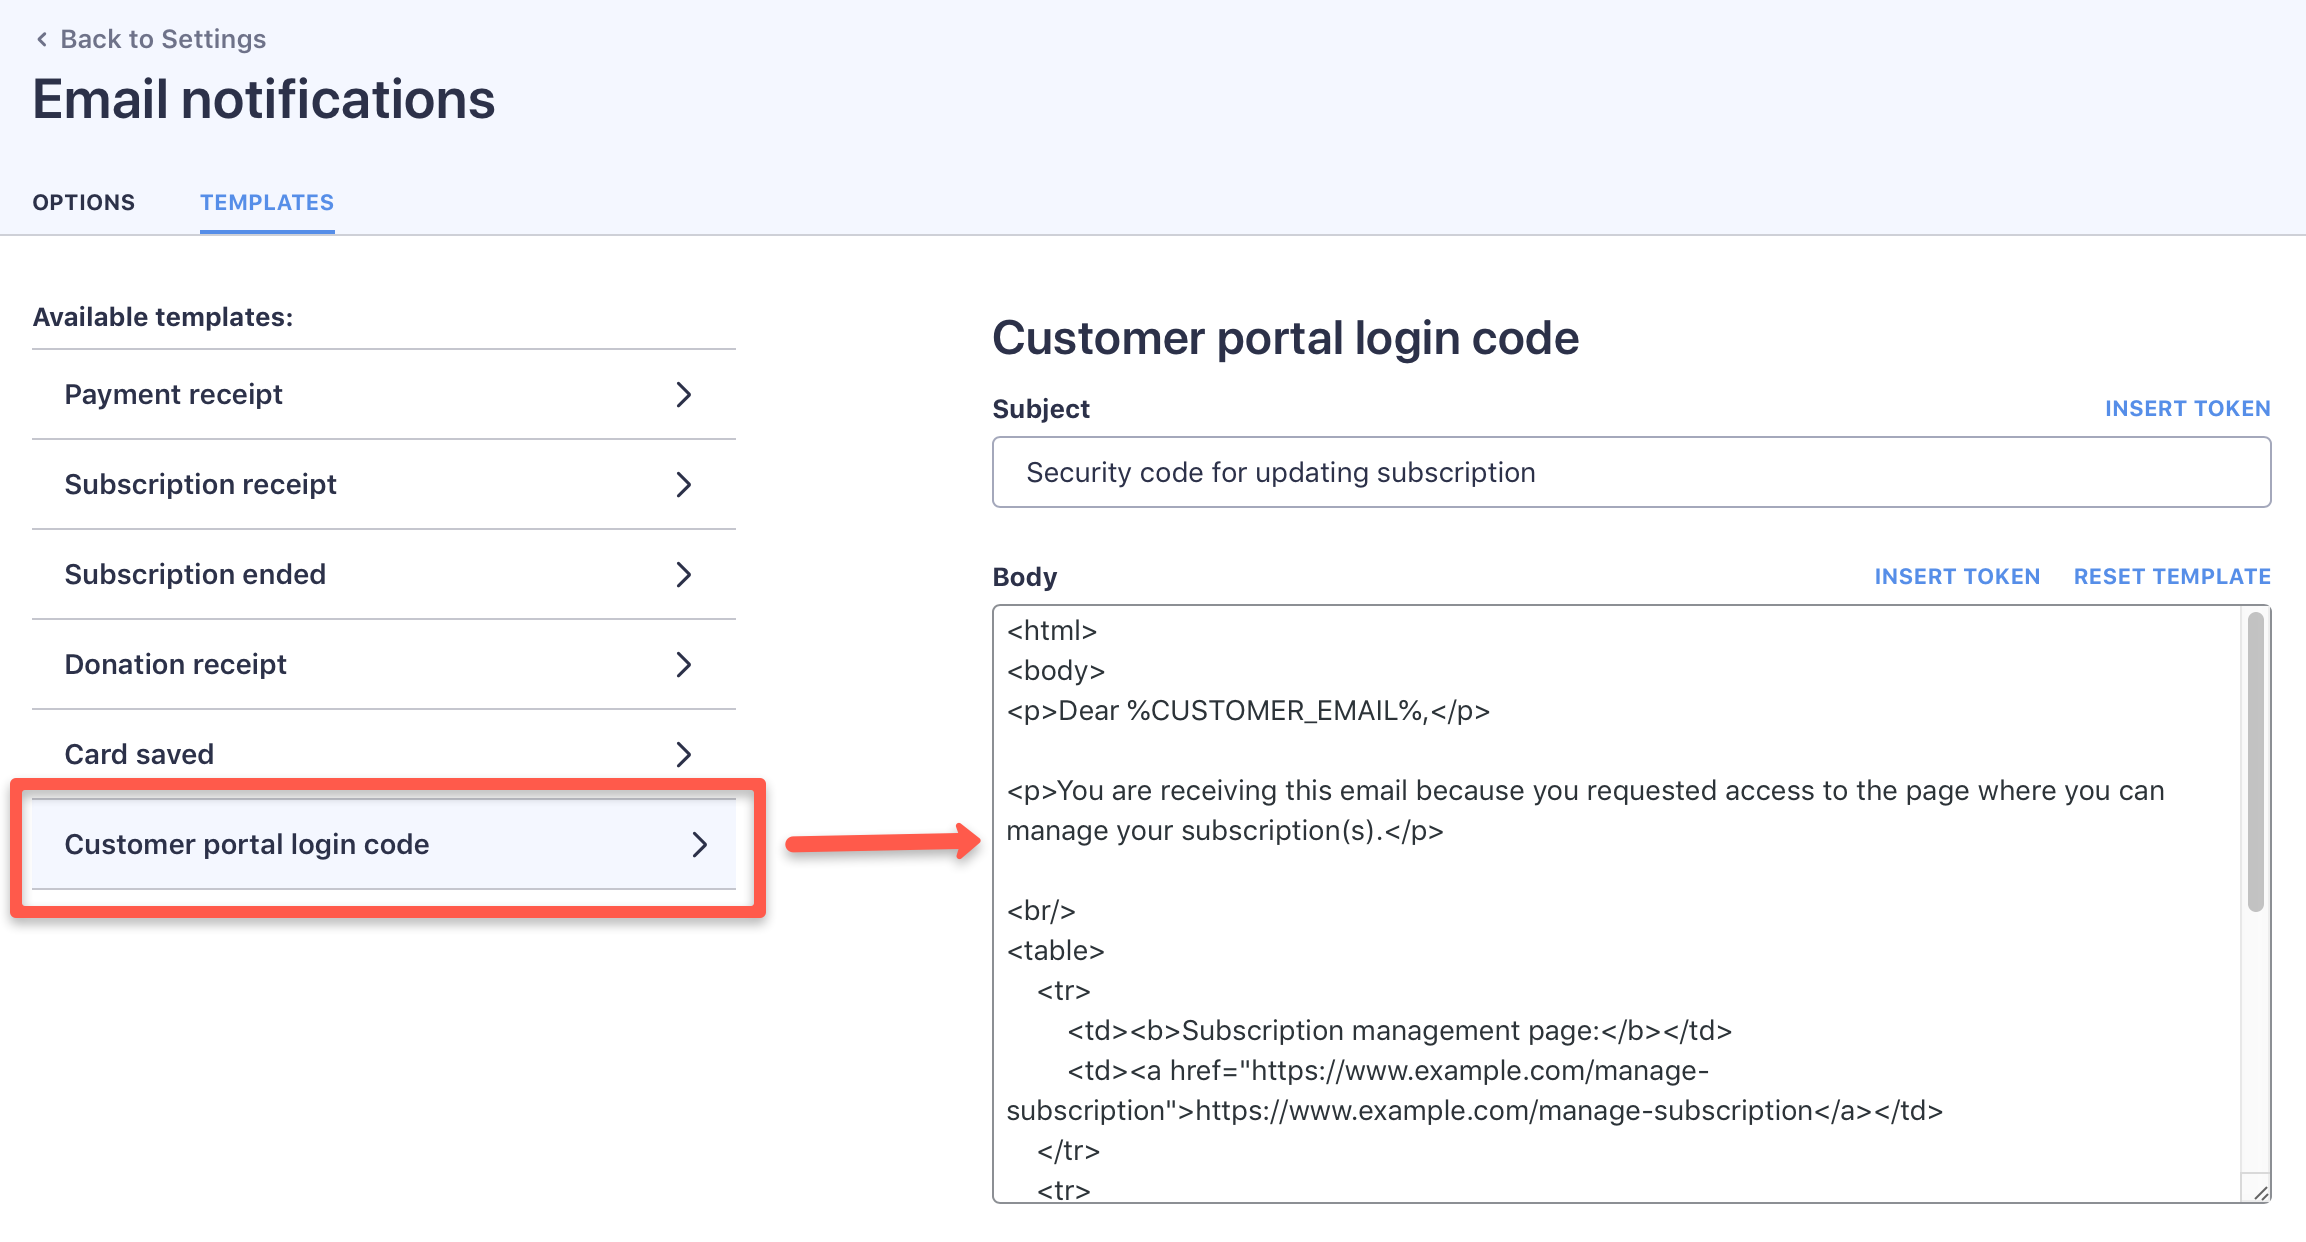 The email template settings for the Customer portal login code